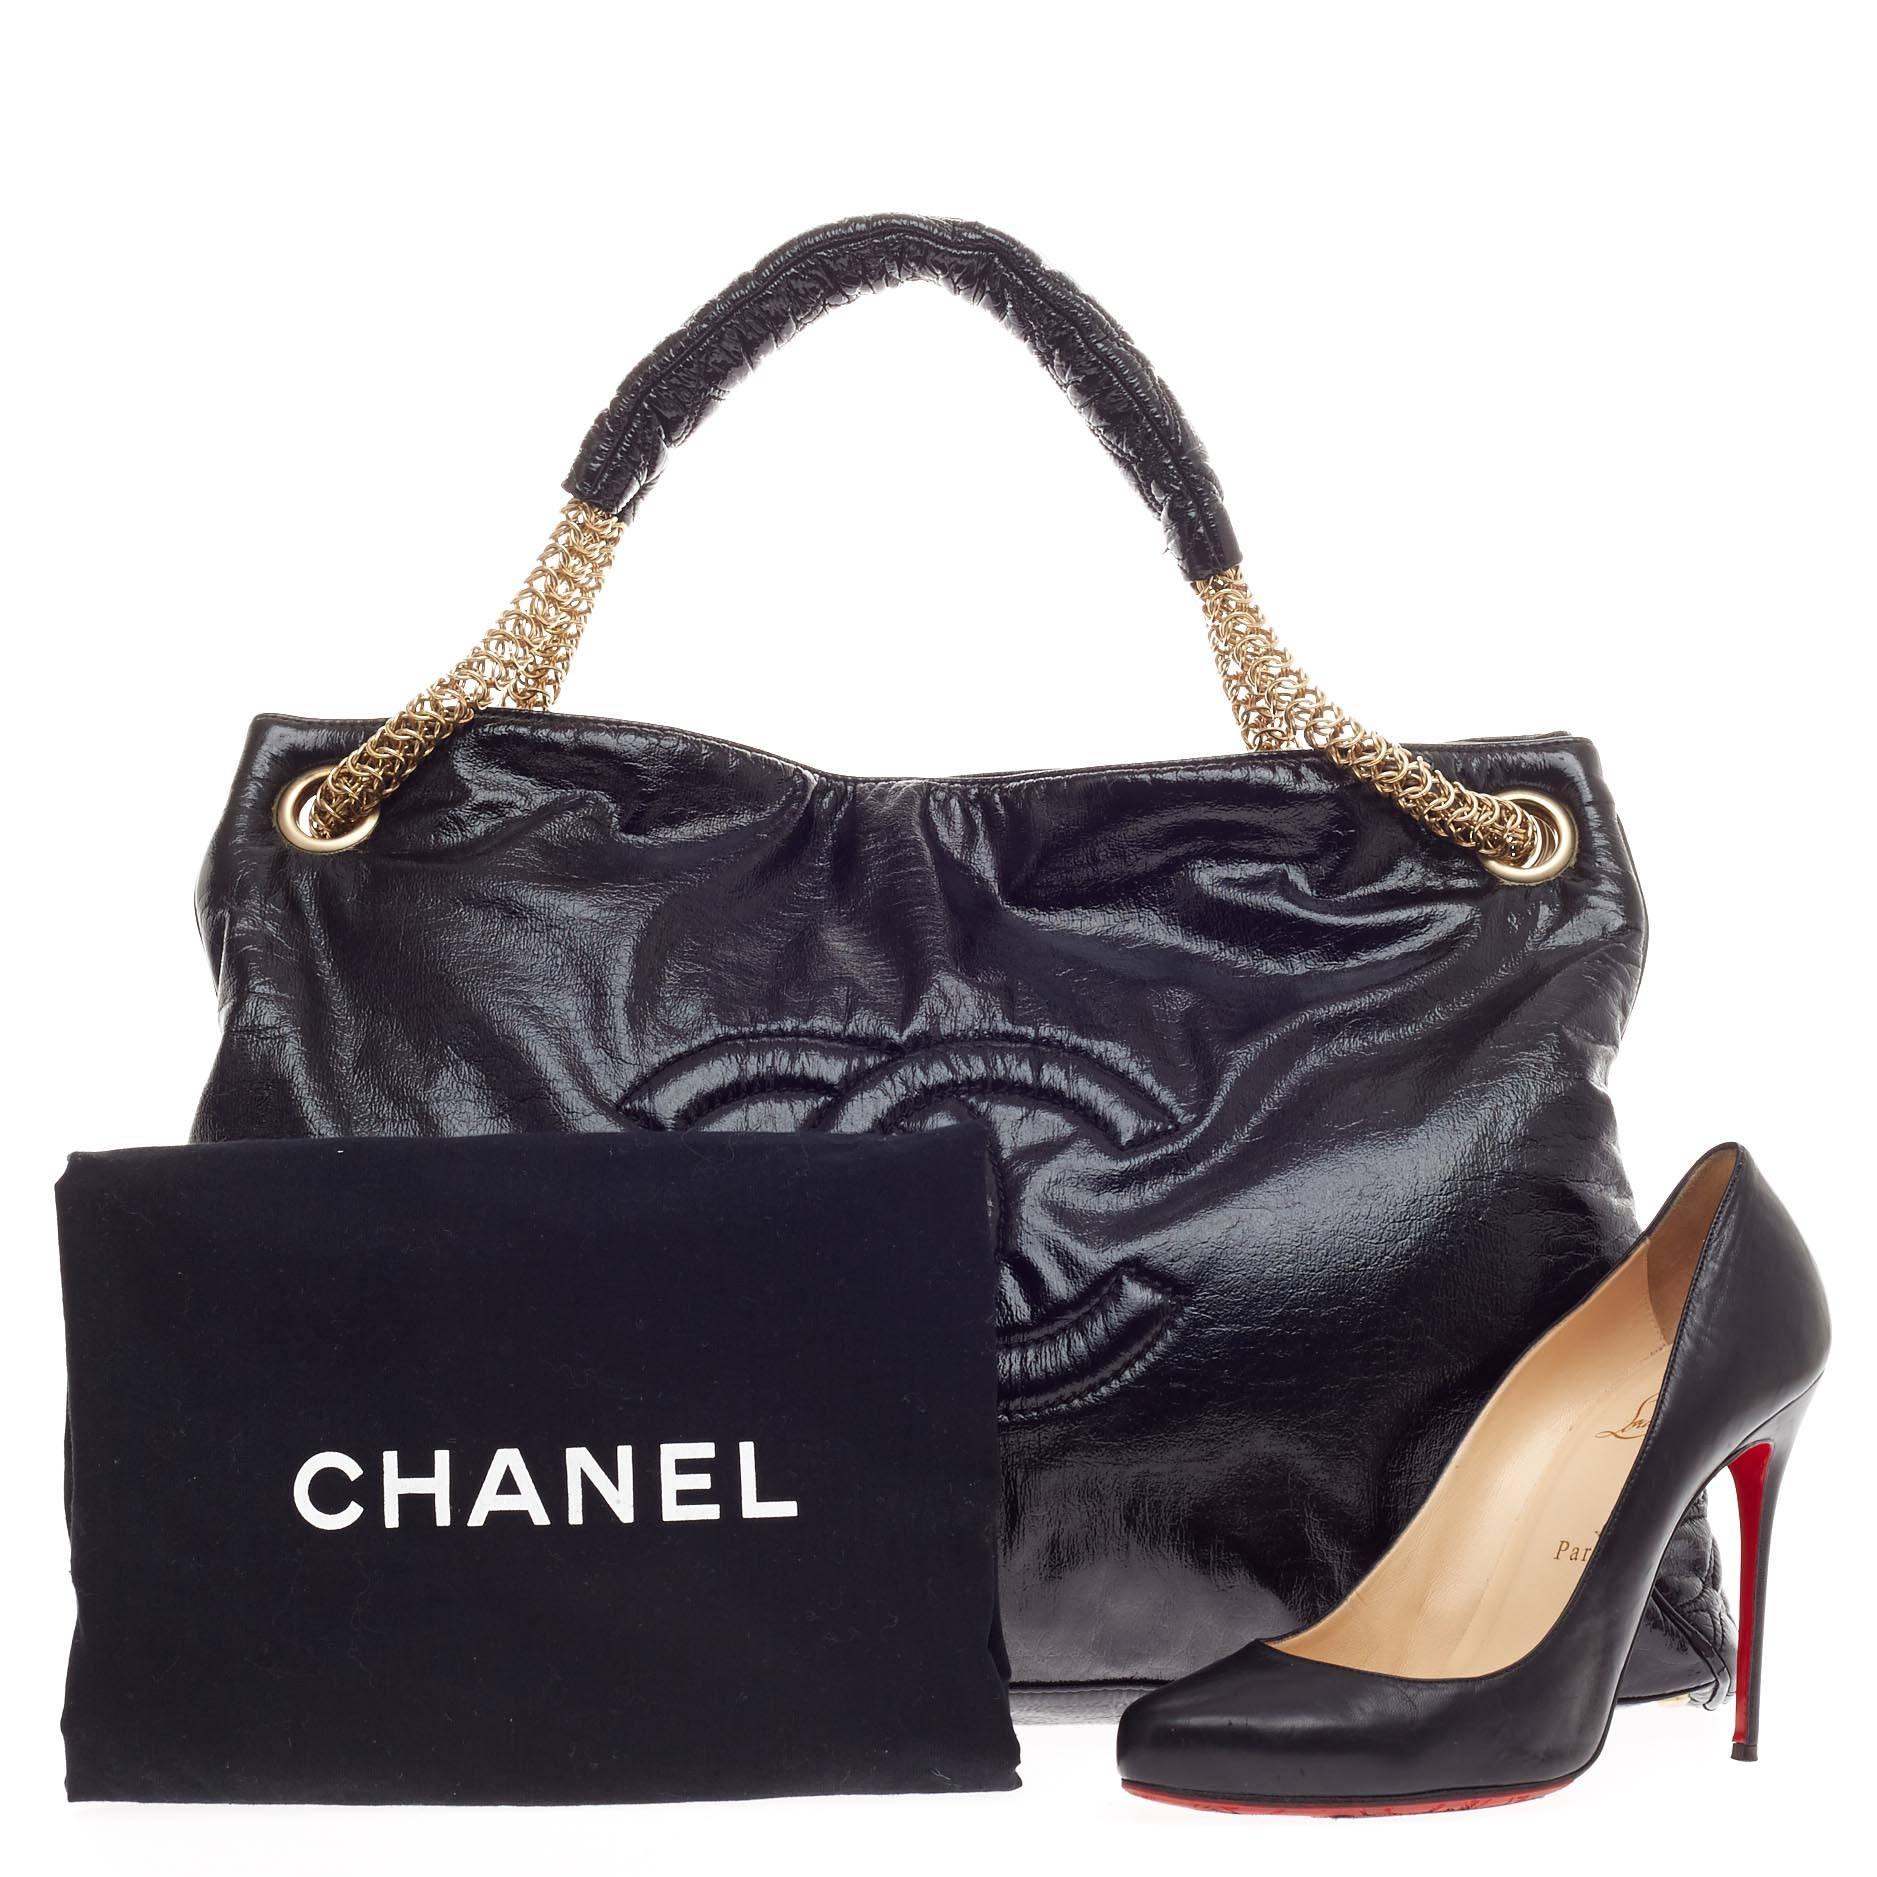 This authentic Chanel Rodeo Drive Tote Patent Vinyl is sophisticated yet classic in design perfect for everyday use. Crafted in distressed black patent vinyl, this oversized tote features dual gold chain handles with pads, oversized CC stitched logo